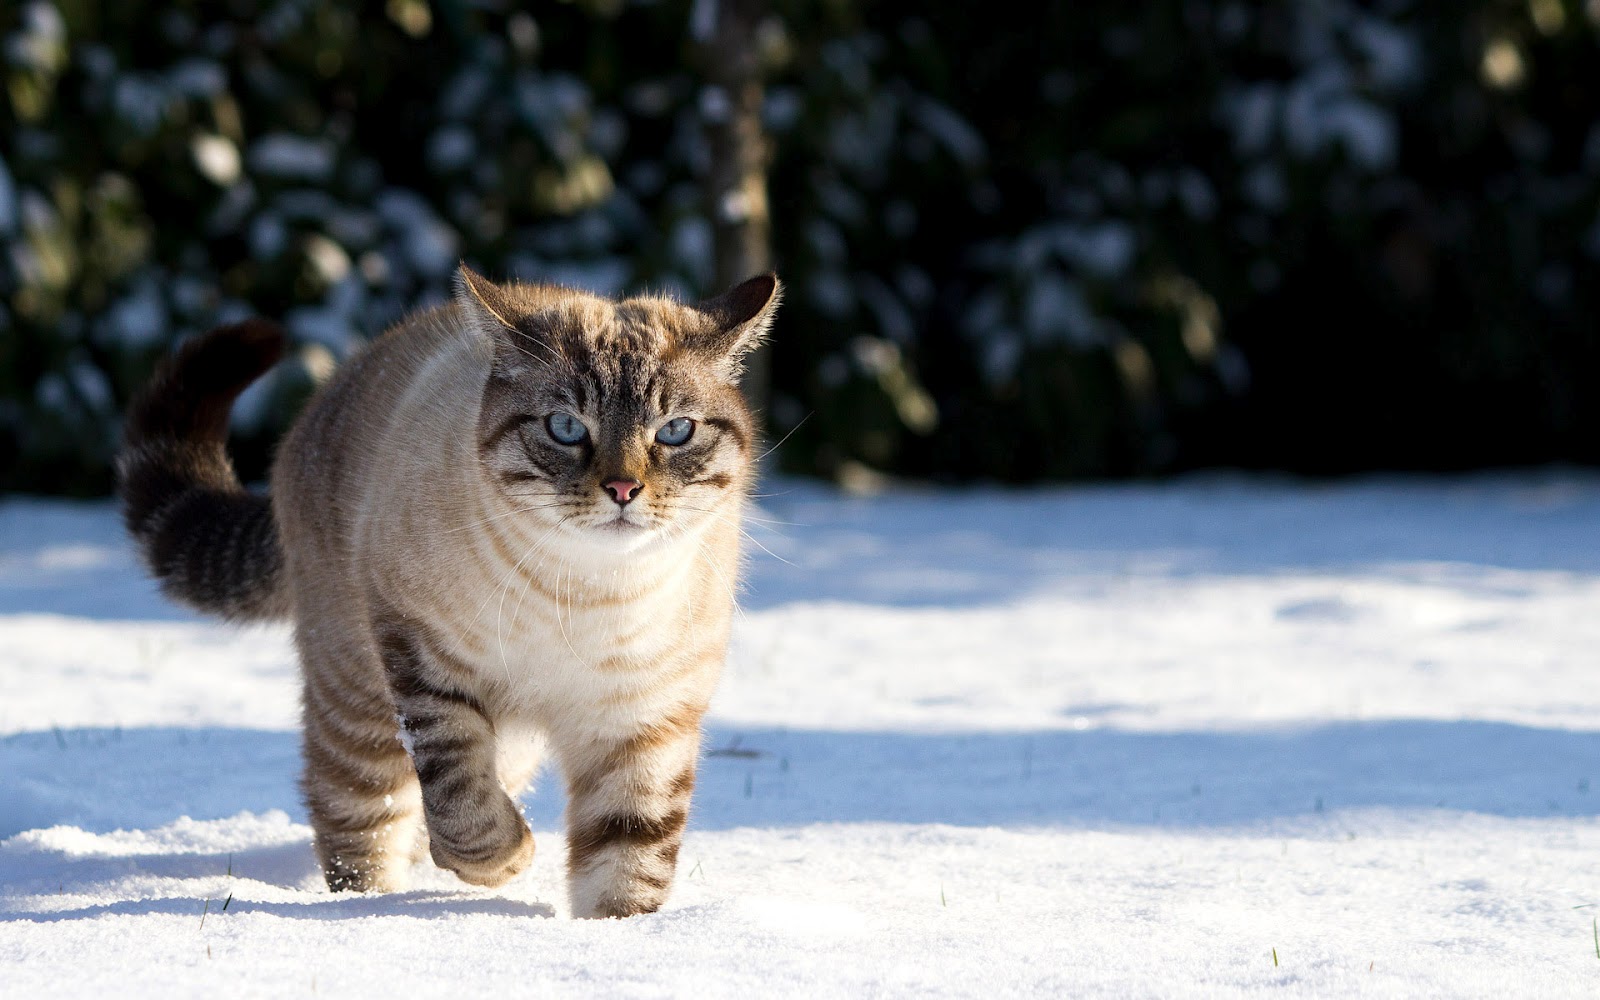 Photo of a cat in winter